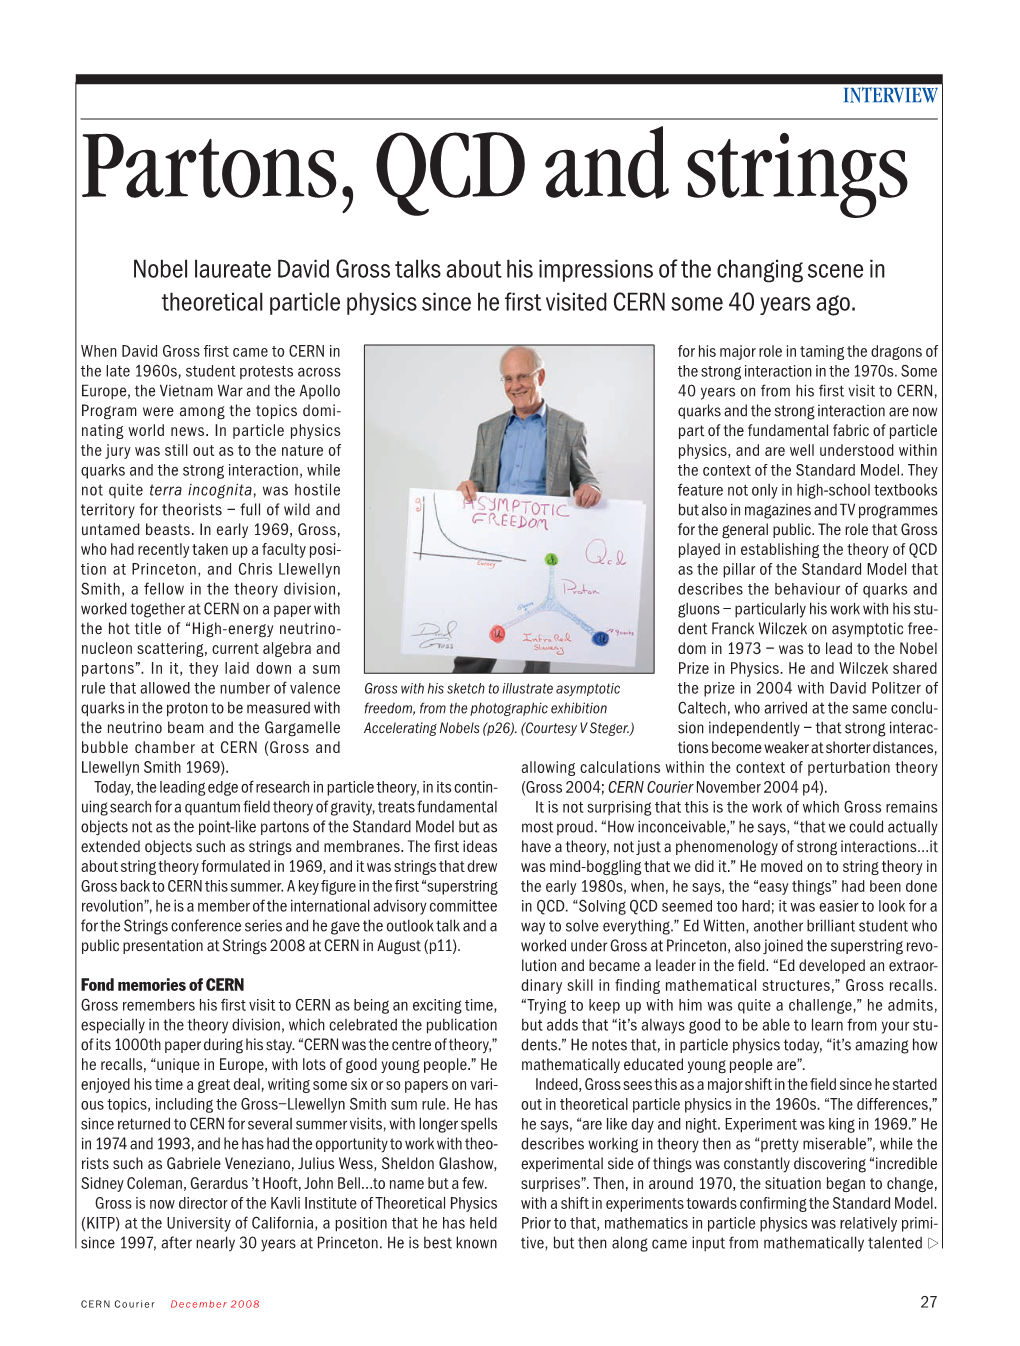 Partons, QCD and Strings